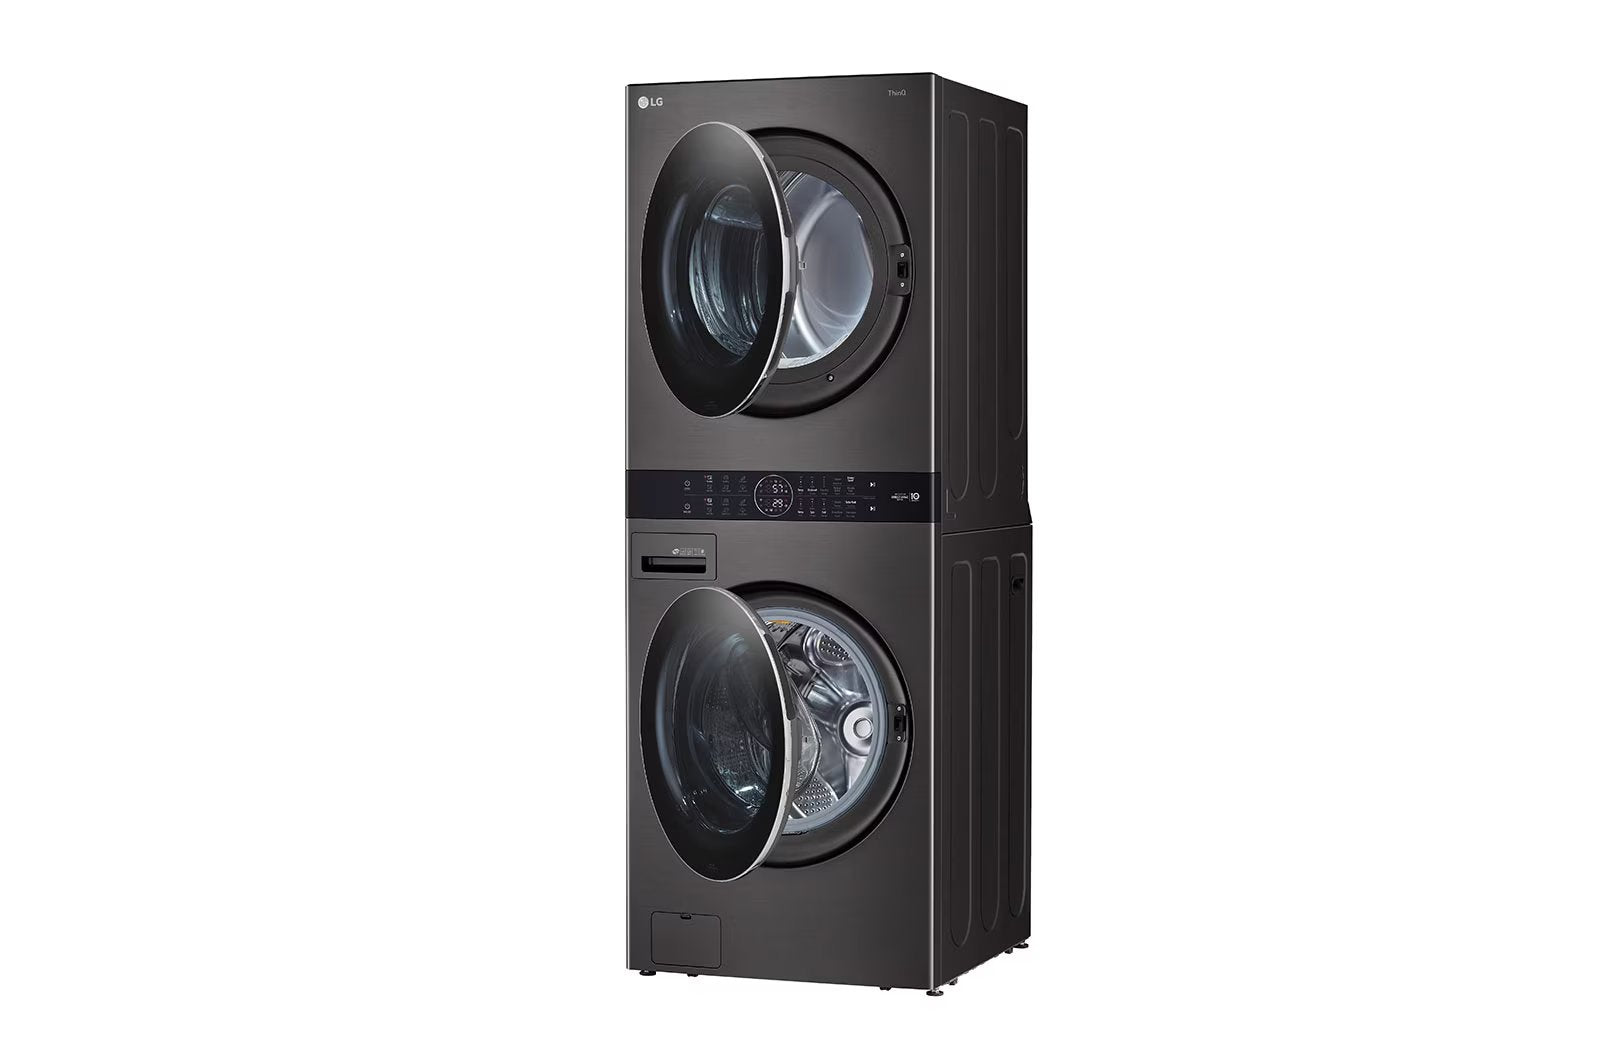 LG - 5.2 cu. Ft Washer and 7.4 Dryer Wash Tower in Black Stainless - WKGX201HBA